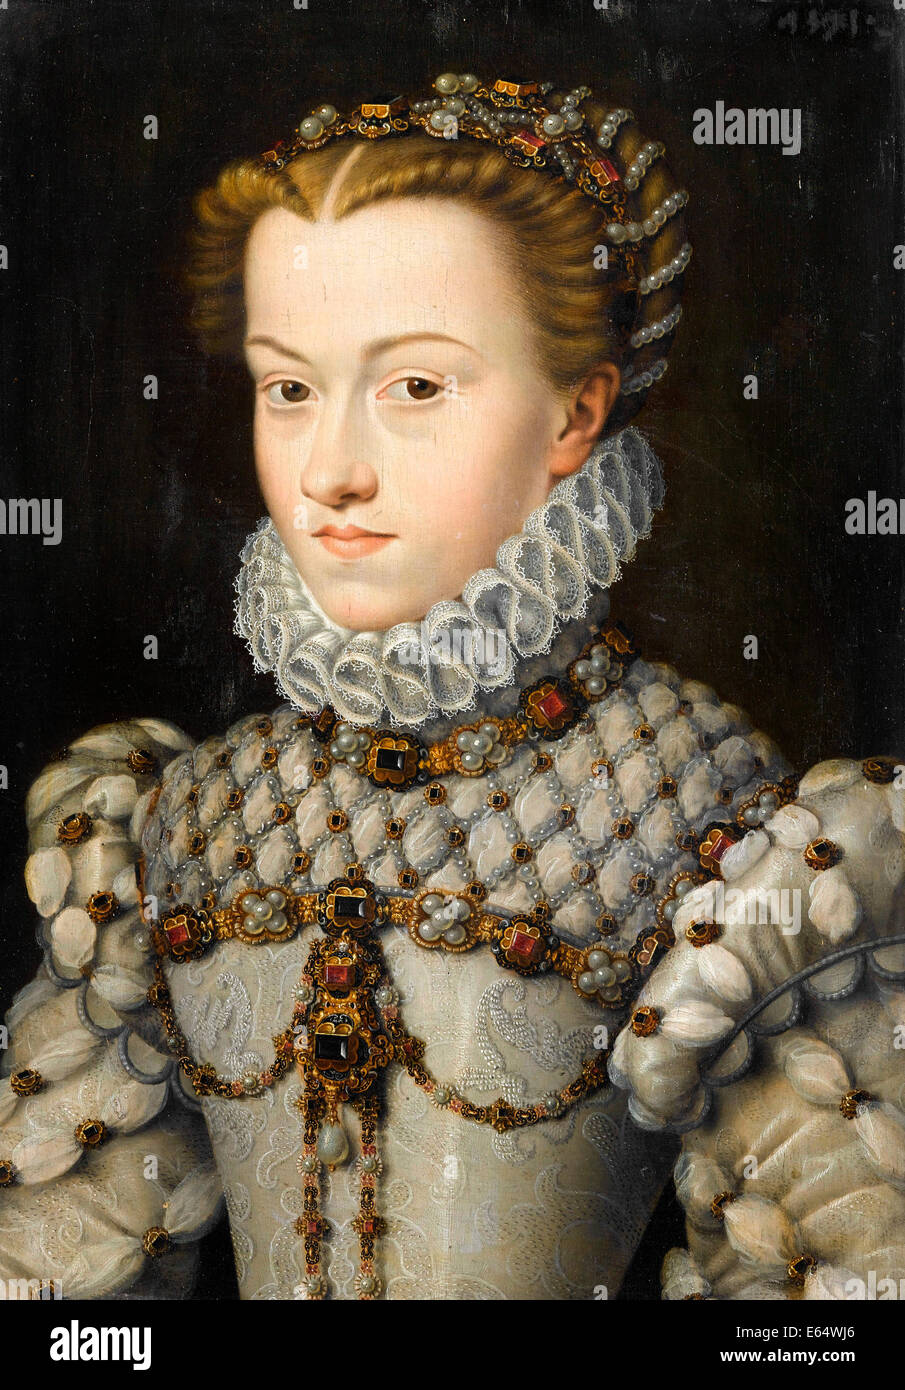 Francois Clouet, Elisabeth of Austria (1554-1592), Queen of France. Circa 1571 Oil on panel. Musee Conde, Chantilly, France. Stock Photo